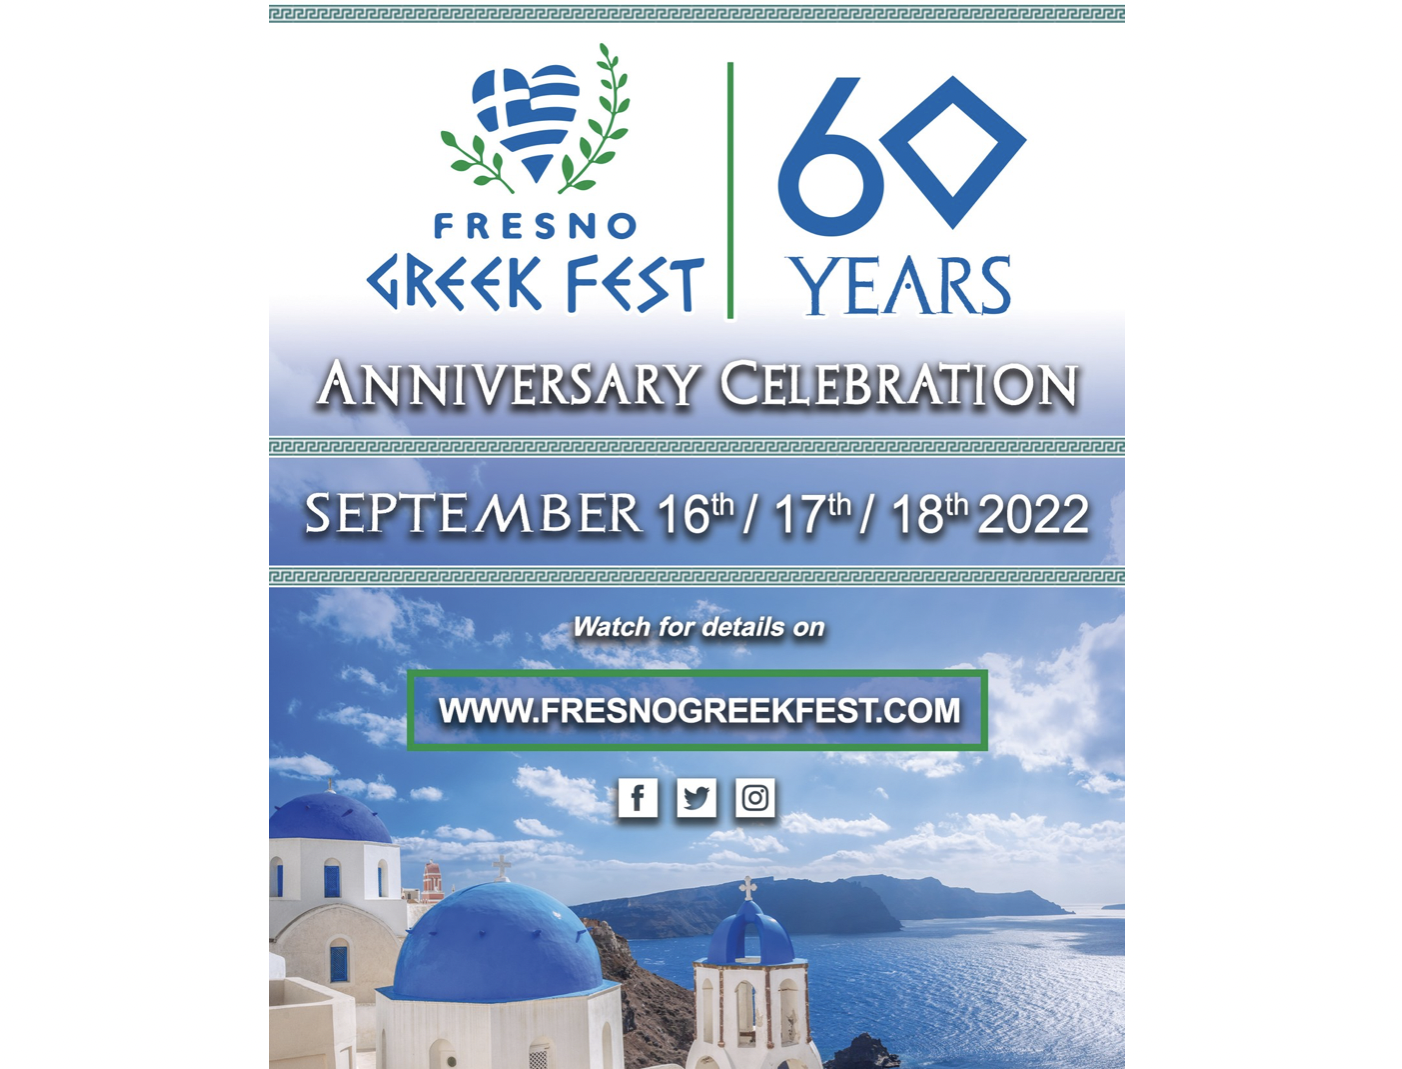 Fresno Greek Fest celebrates 60th anniversary after 2 years of